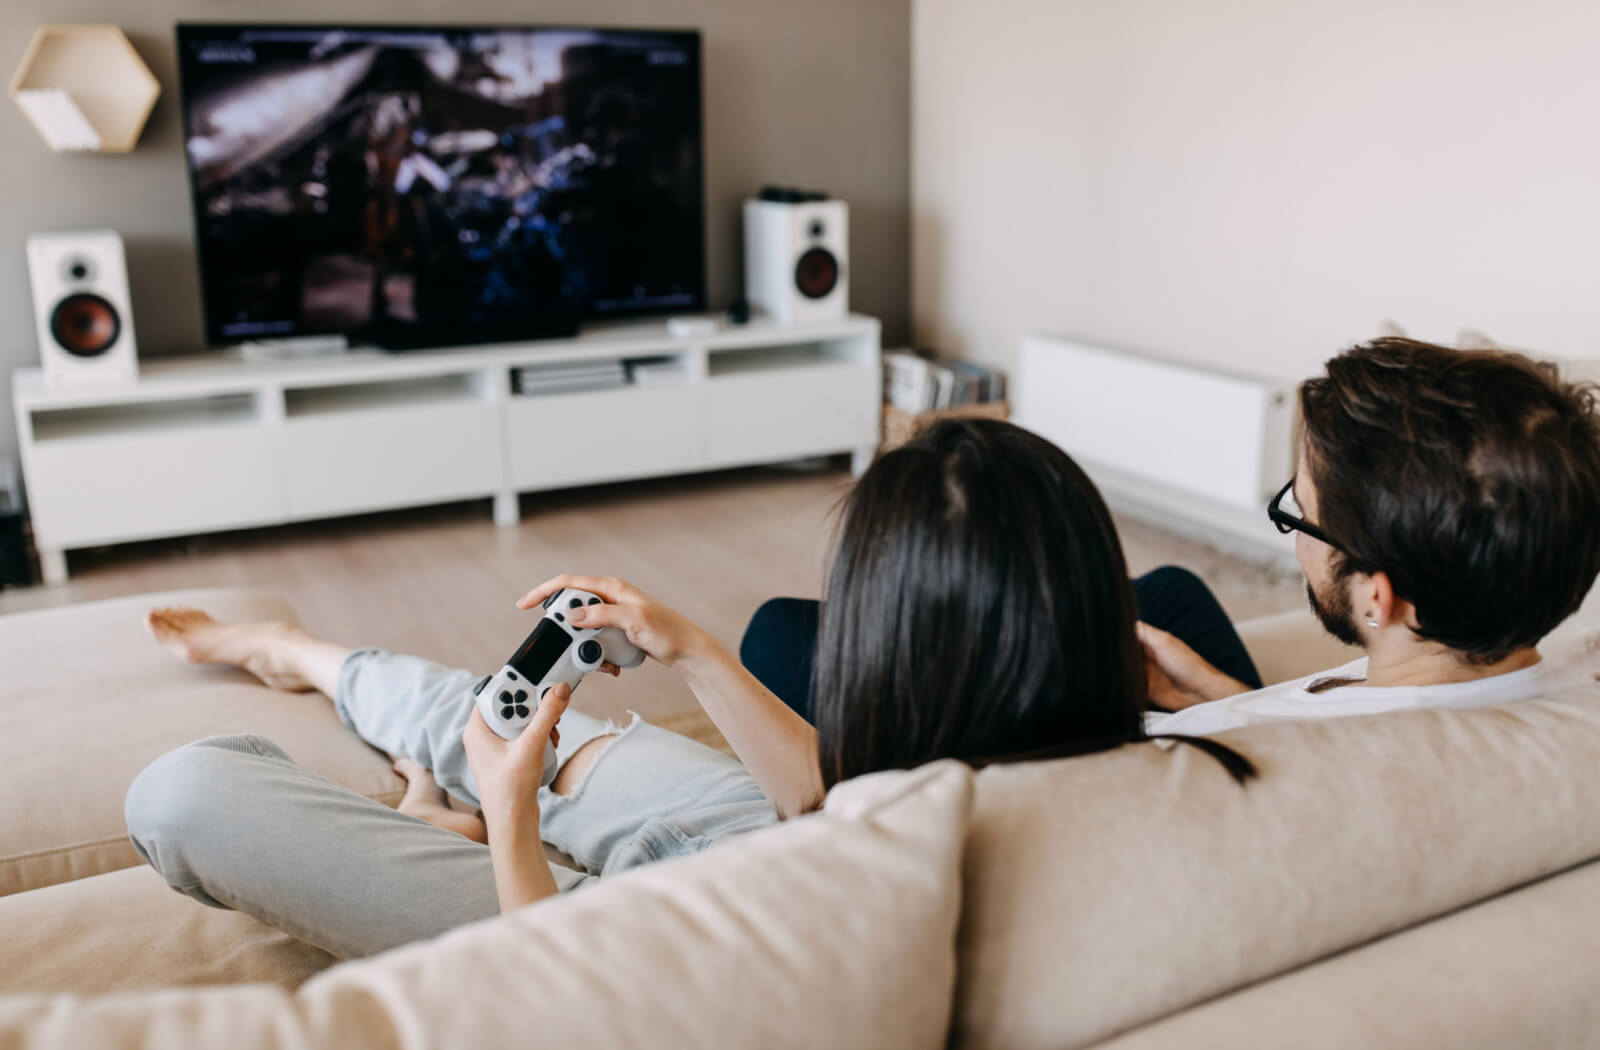 A couple sitting on a couch is playing video games away from the TV and taking screen breaks every 20 minutes to follow the 20-20-20 rule